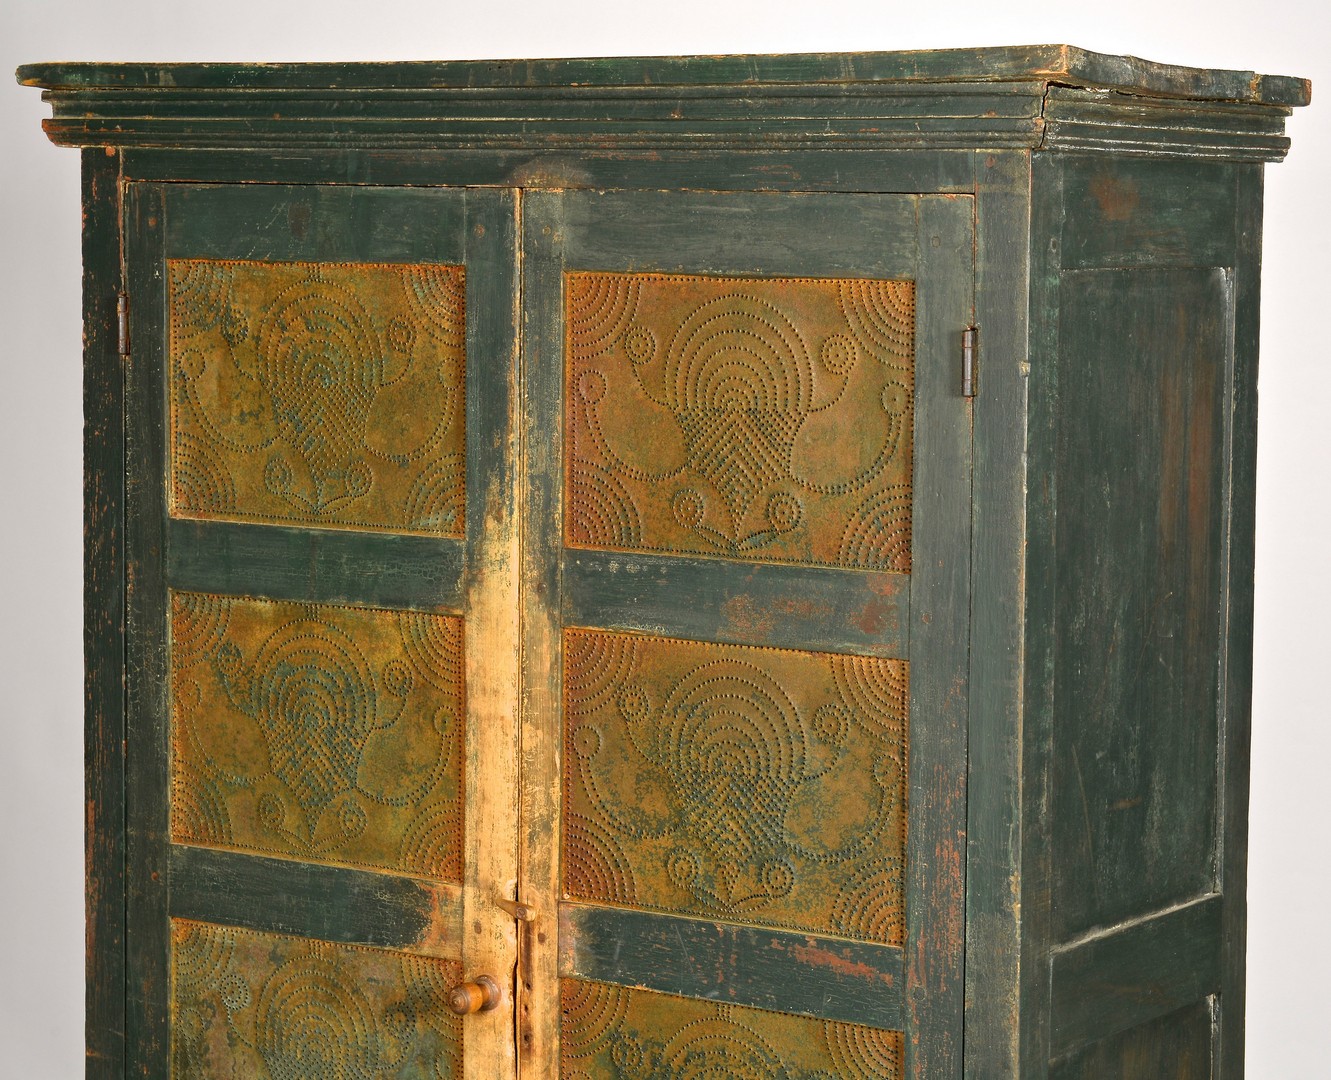 Lot 124: Virginia Green Painted Pie Safe, Tapered Legs